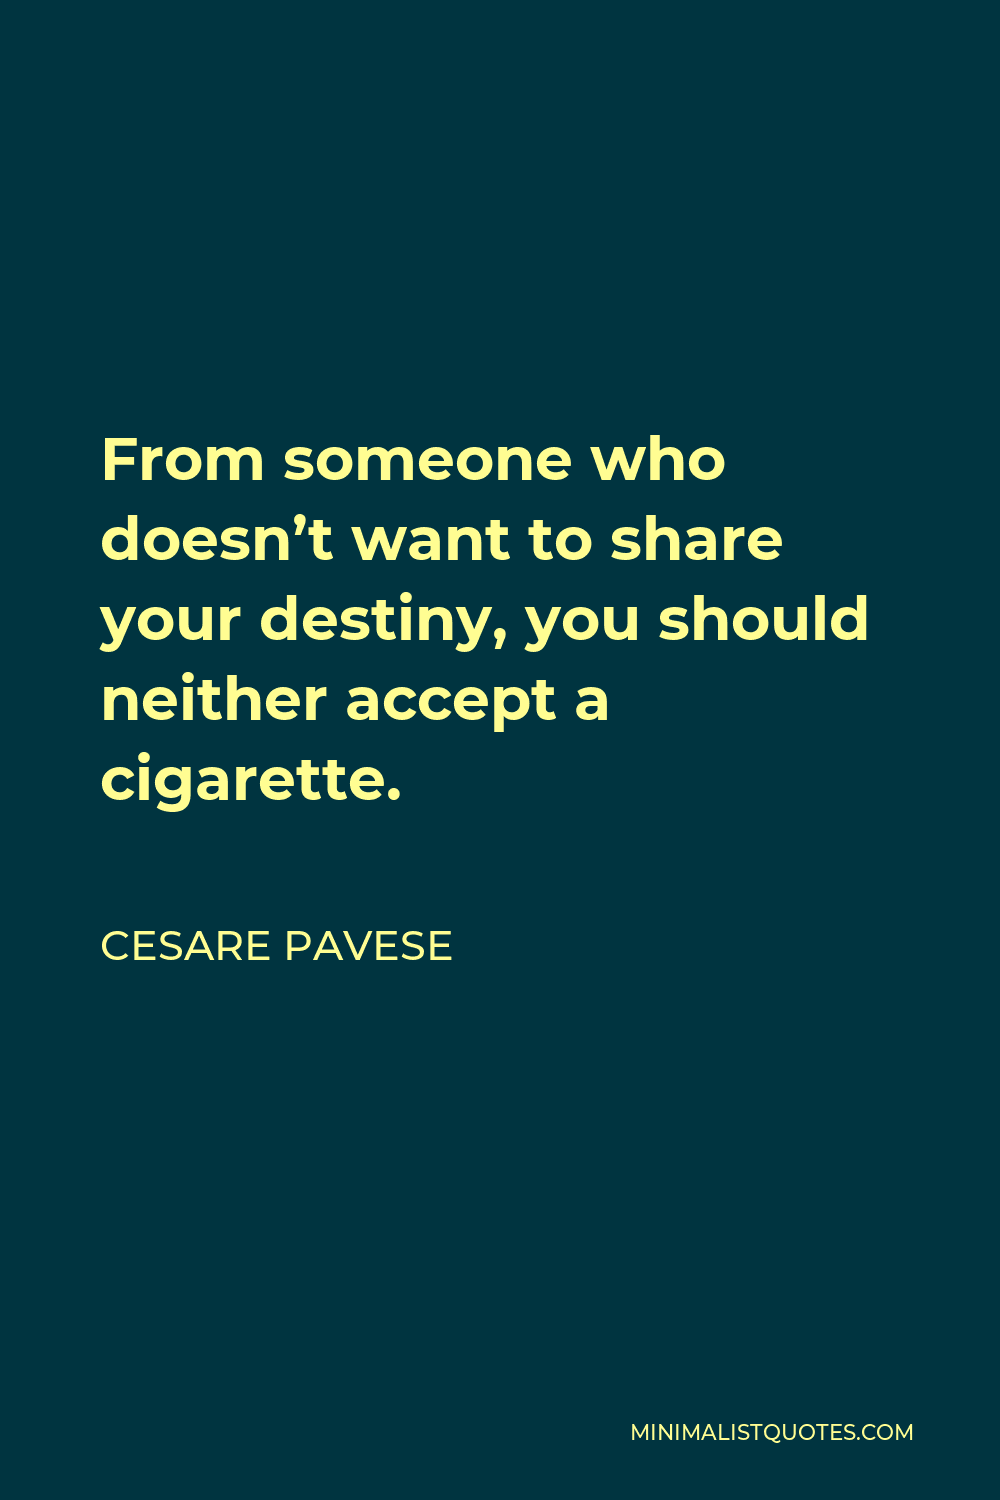 Cesare Pavese Quote - From someone who doesn’t want to share your destiny, you should neither accept a cigarette.